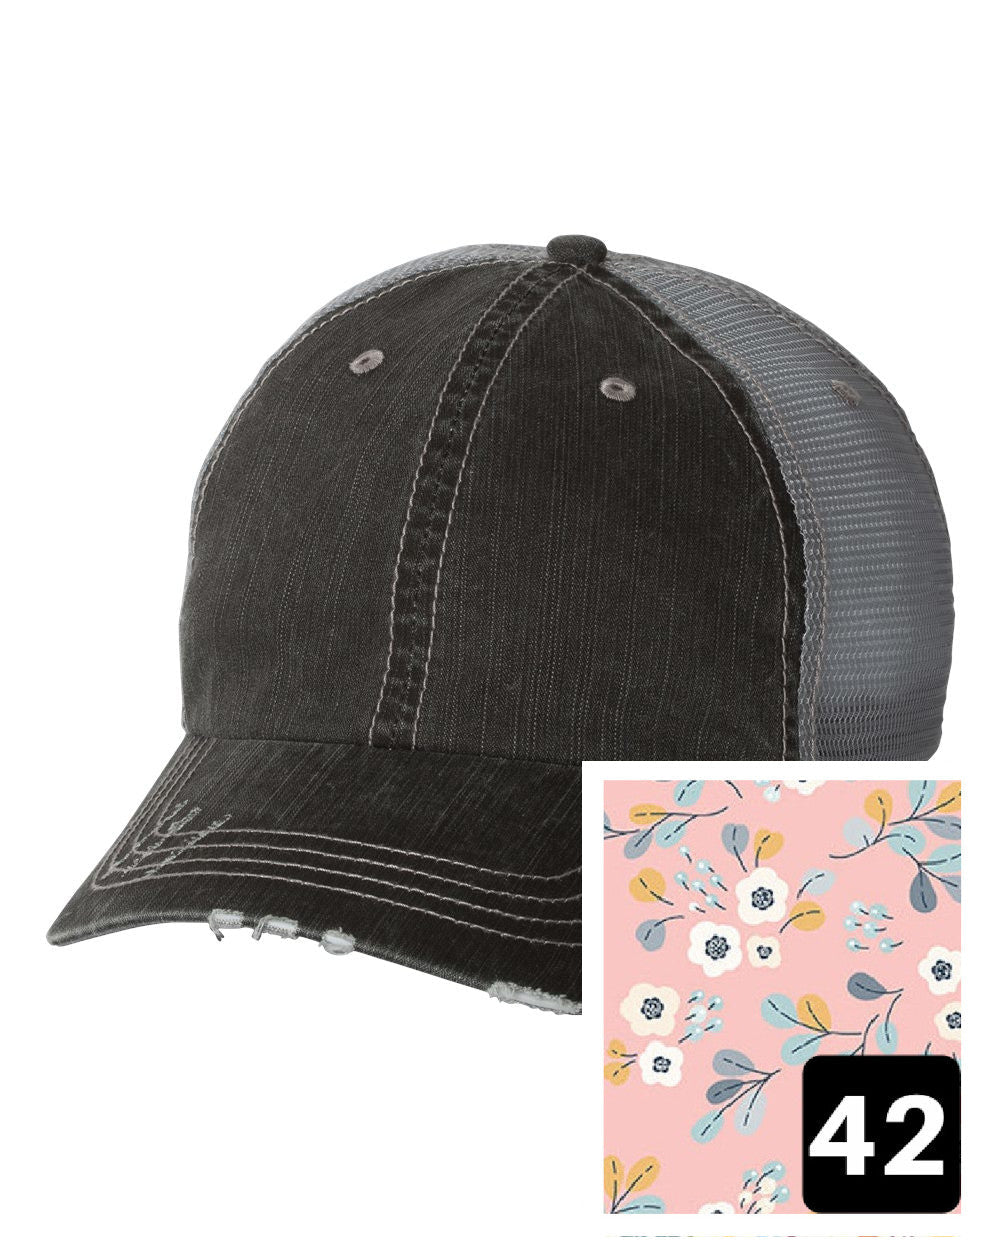 gray distressed trucker hat with light blue and pink mosaic fabric state of West Virginia